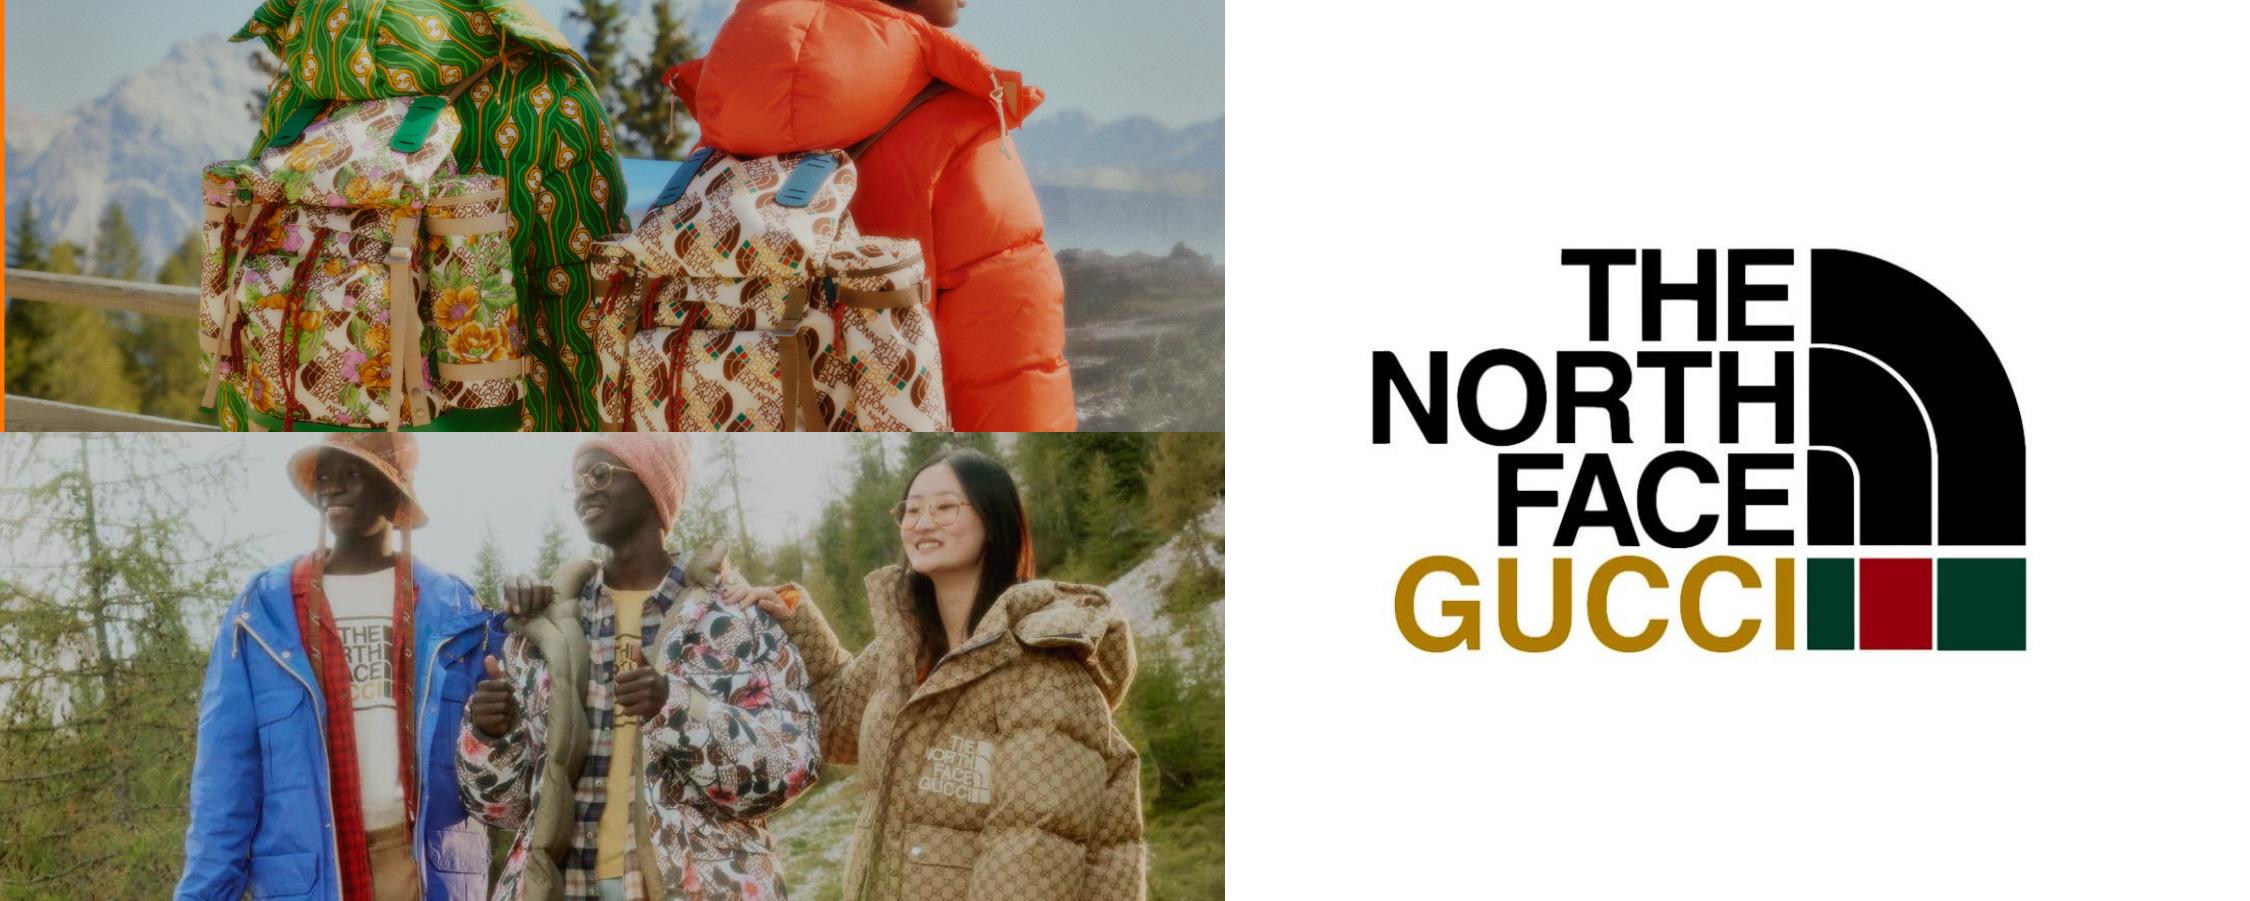 Gucci and The North Face collaboration coming soon